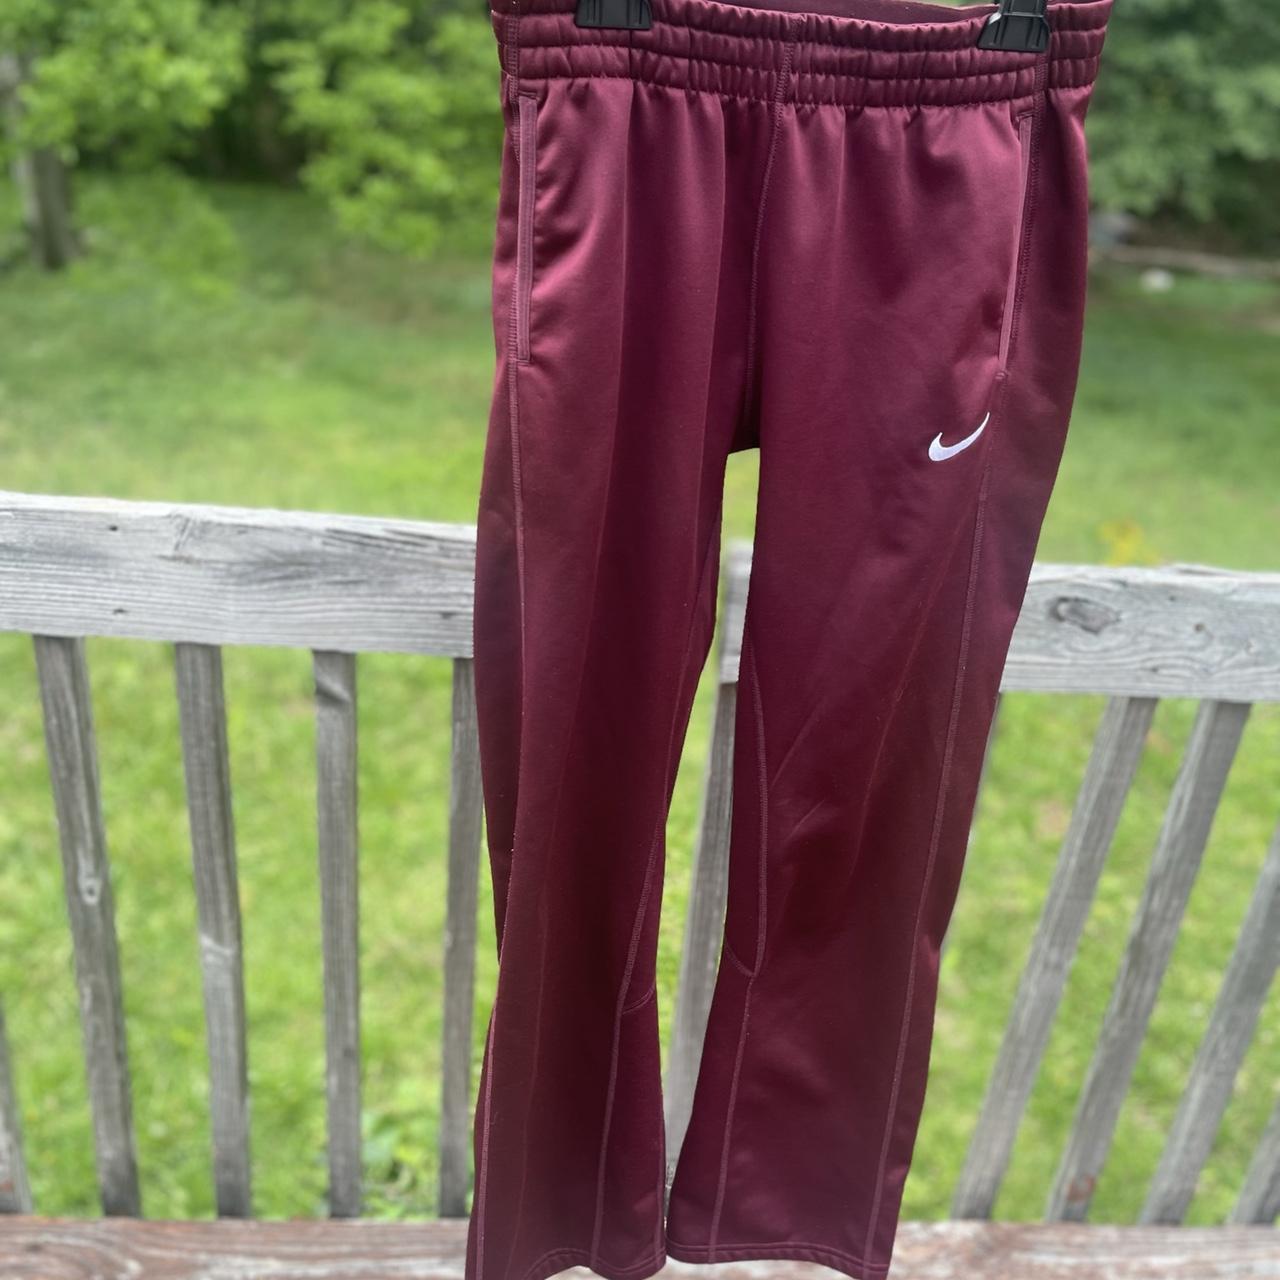 Nike Men's Burgundy and Red Joggers-tracksuits | Depop